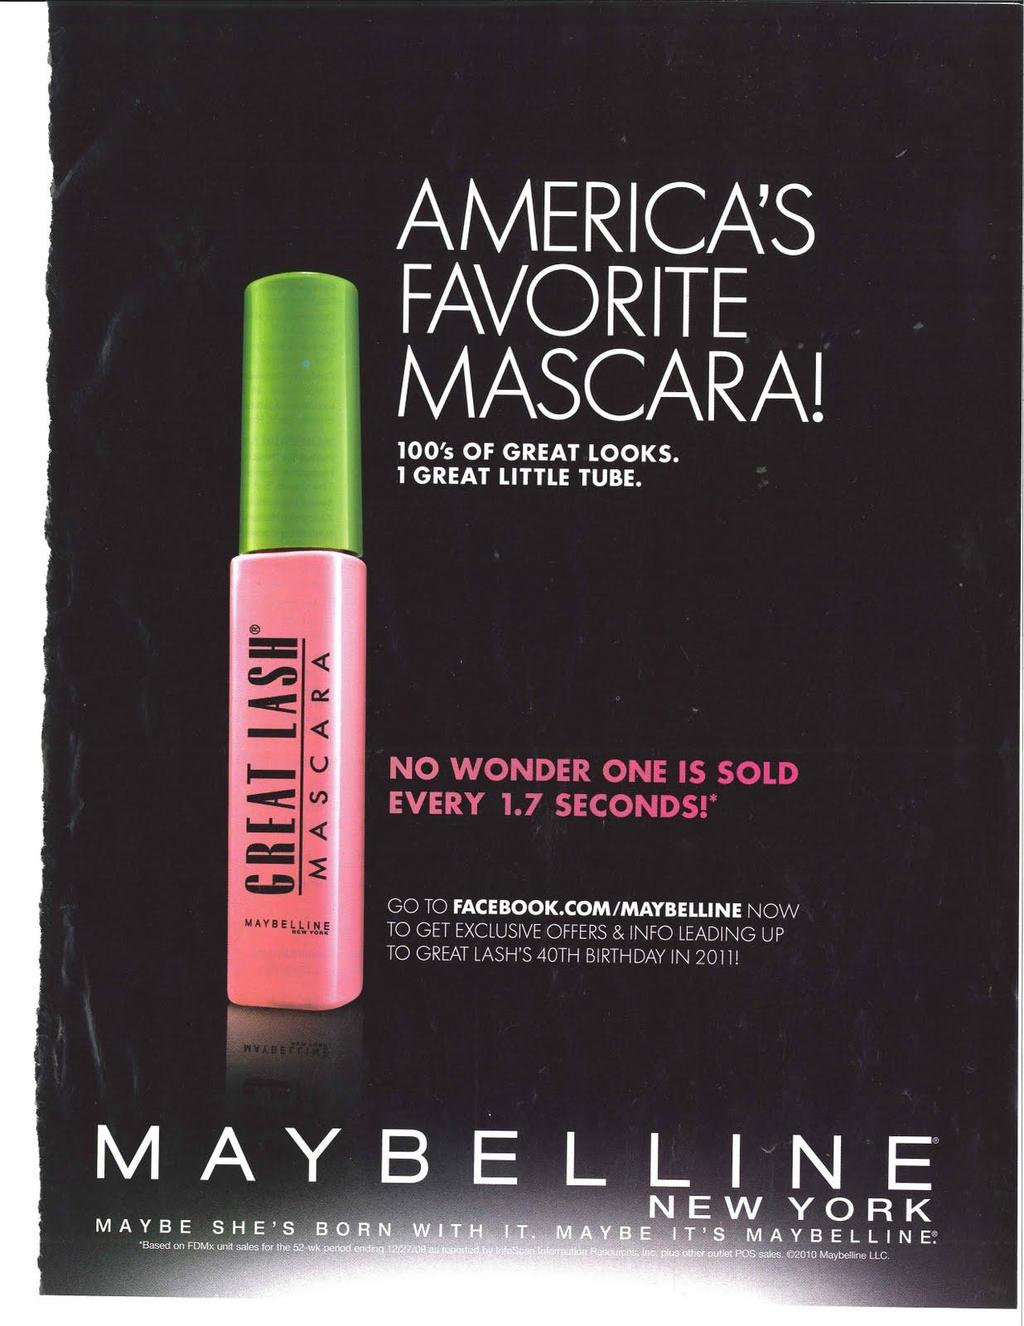 Example: Tube of mascara America s favorite mascara! One sold every 1.7 seconds.